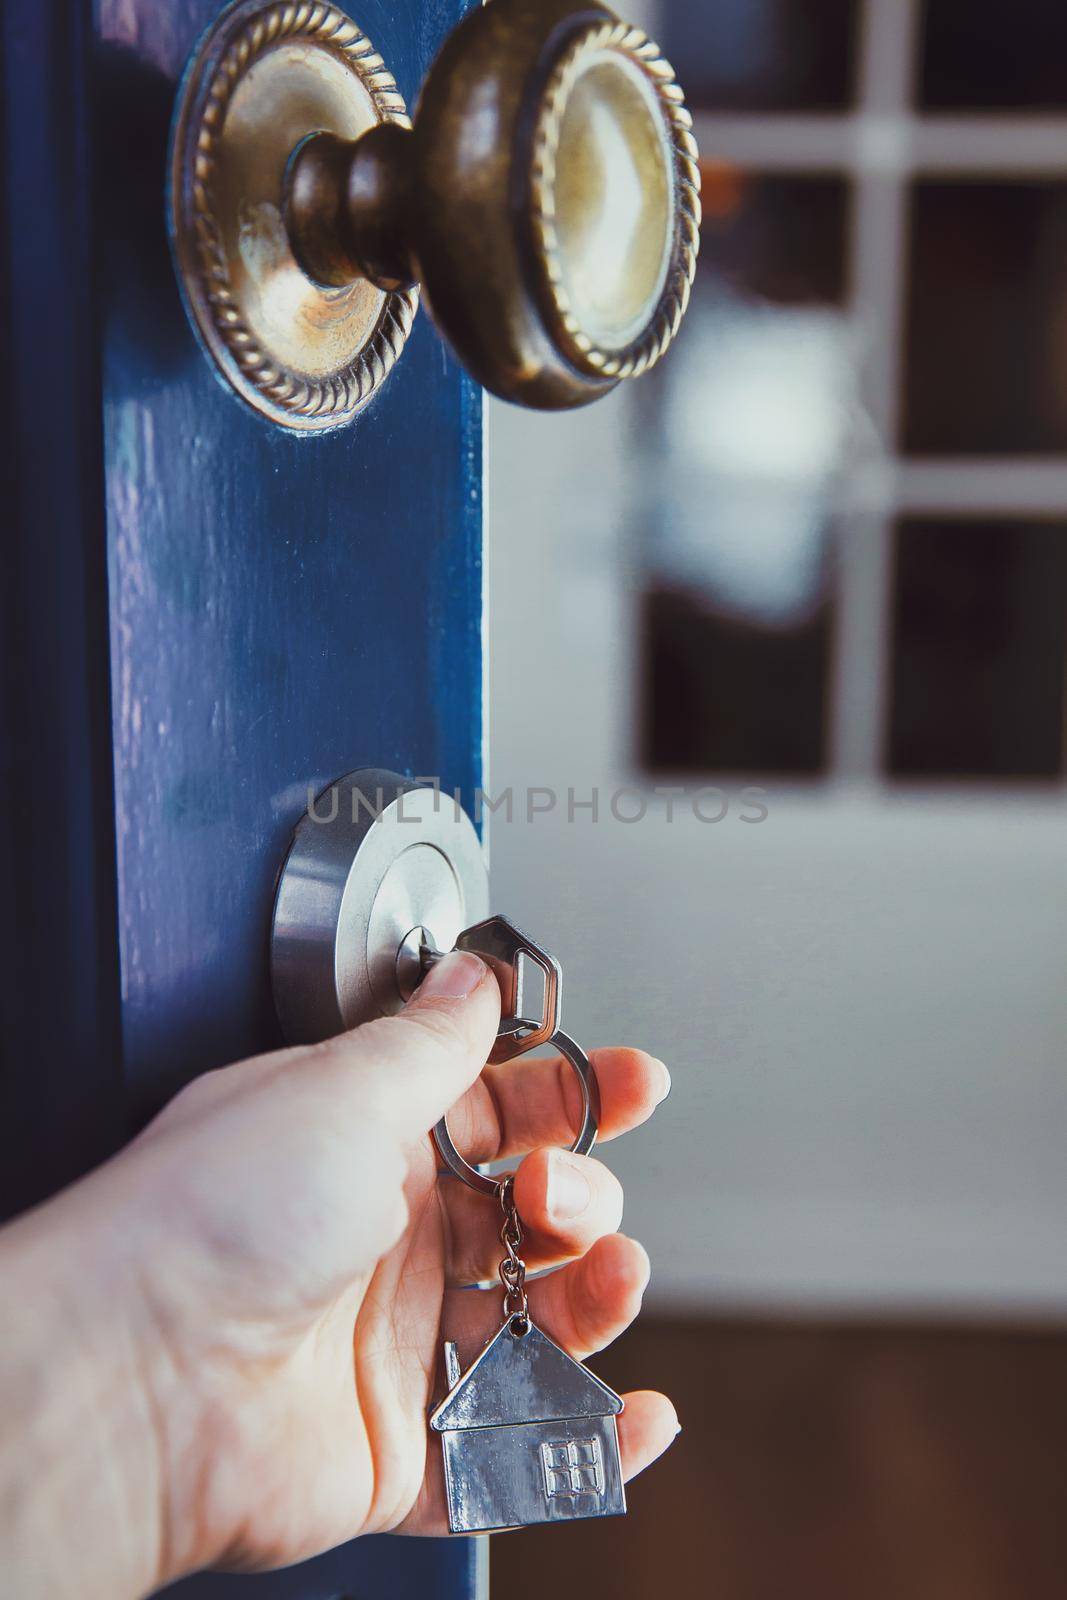 landlord, Estate agent or new home owner opening the door of a cozy new home with silver key, invesment real estate, business, financial concept copy space close up